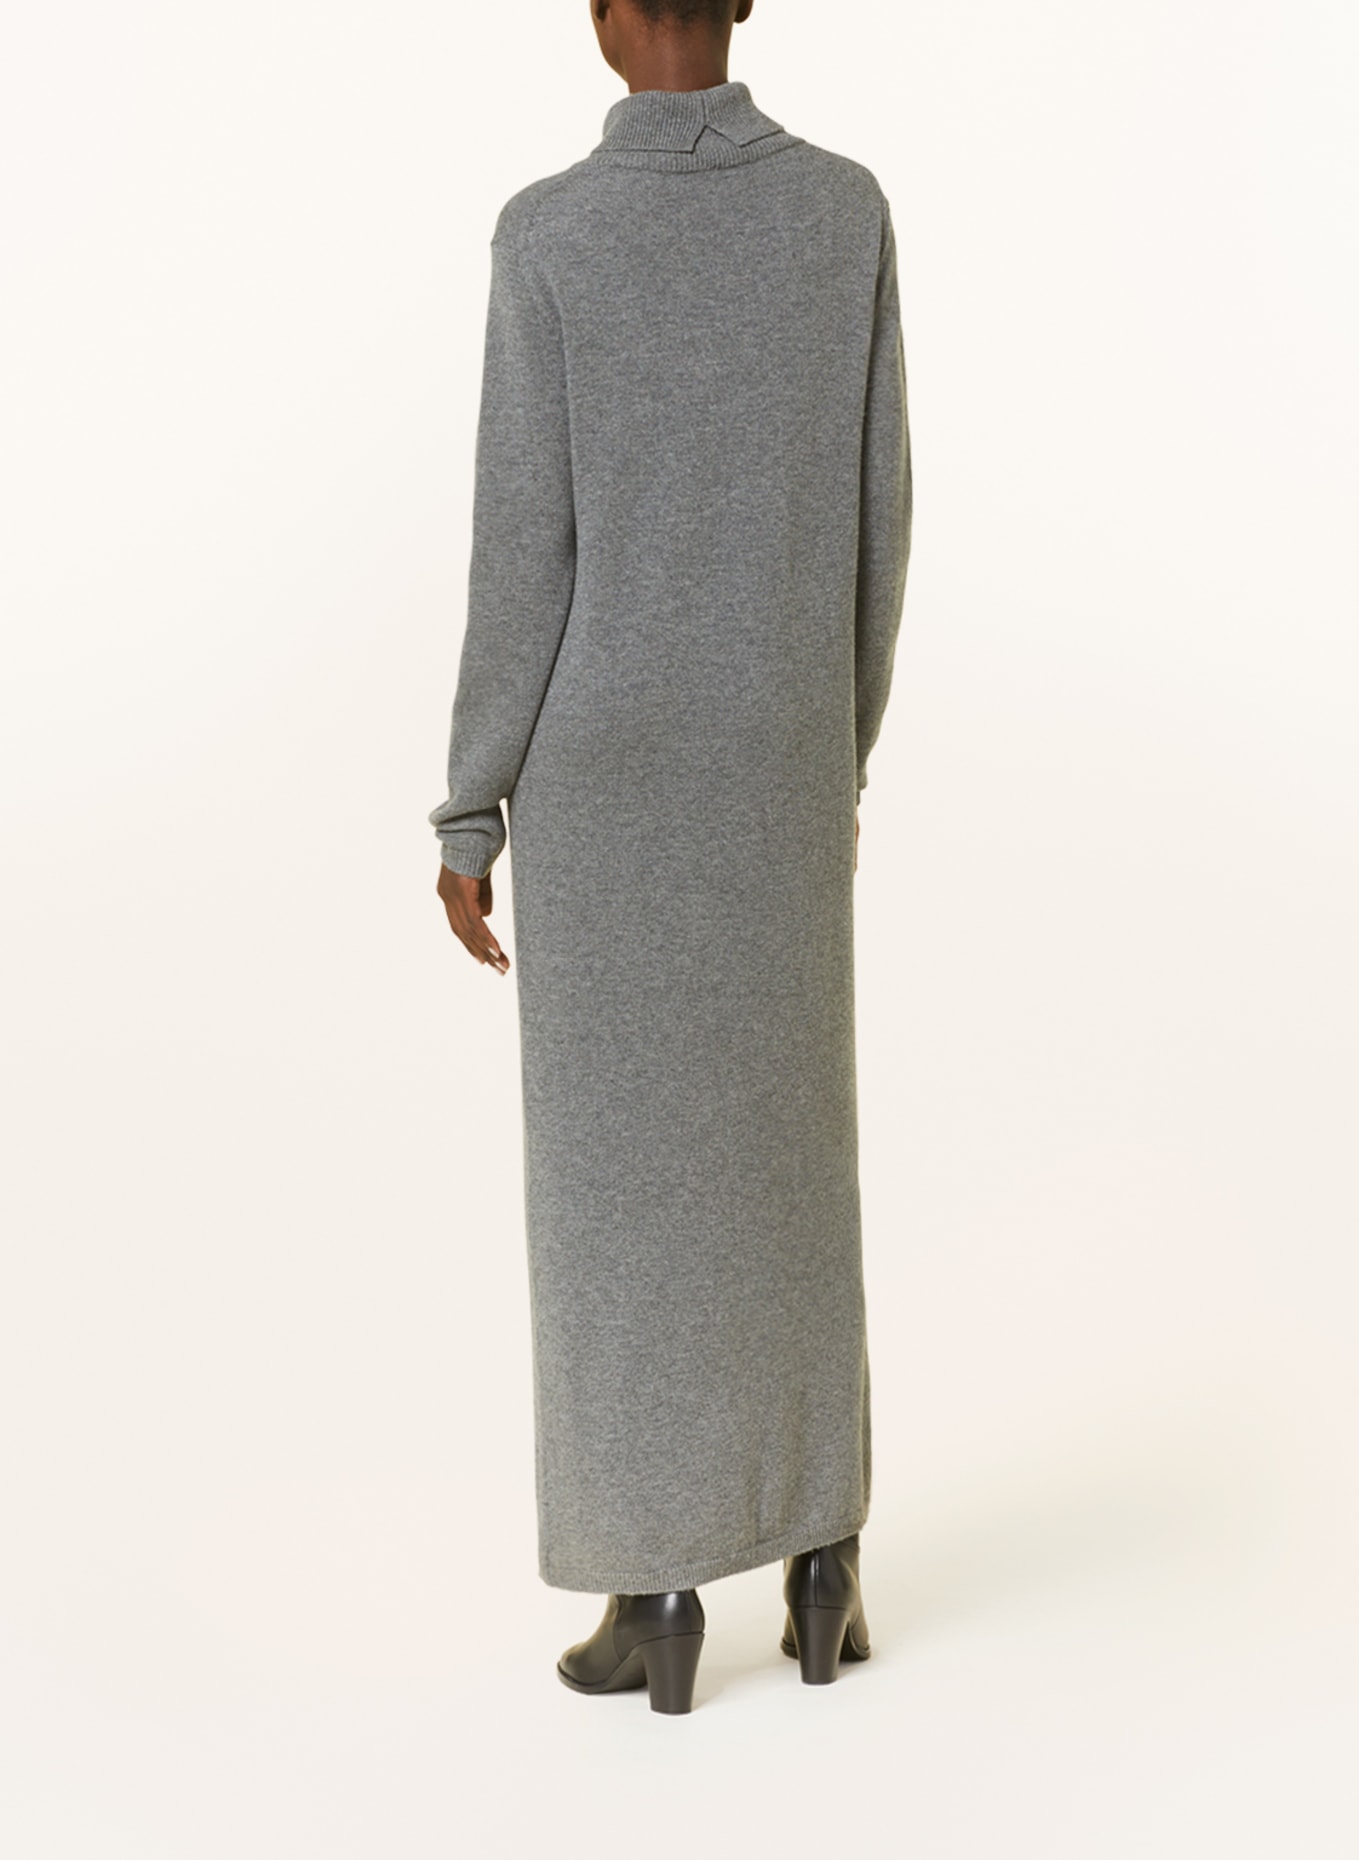 CLOSED Knit dress, Color: GRAY (Image 3)